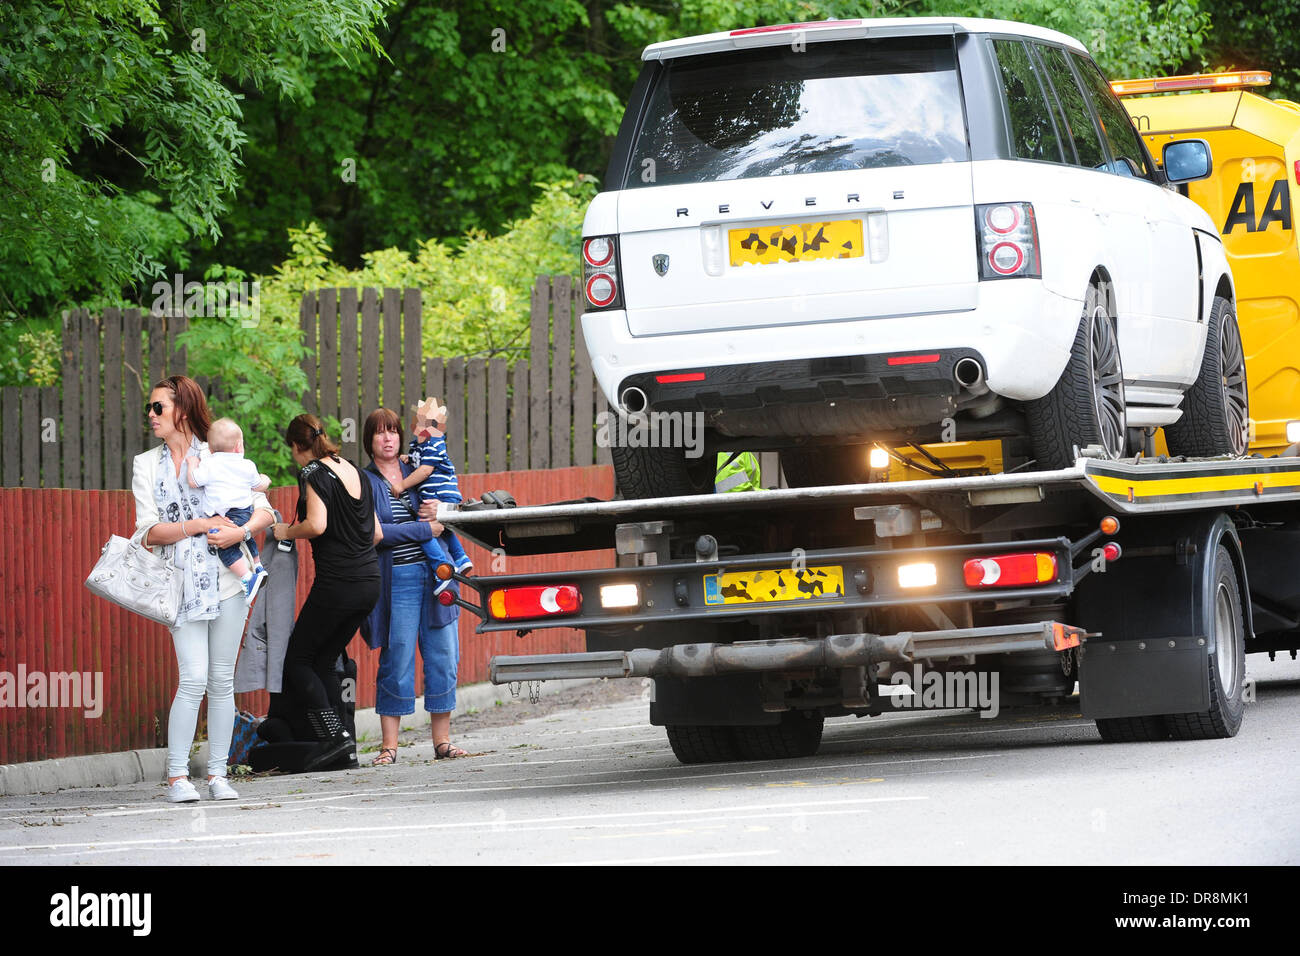 Danielle Lloyd  takes her children to a charity day at Camelot theme park, organised by the Liverpool Taxi drivers association.  Danielle was rescued at the roadside by the AA after her Range Rover broke down. Liverpool, England - 20.06.12 Stock Photo